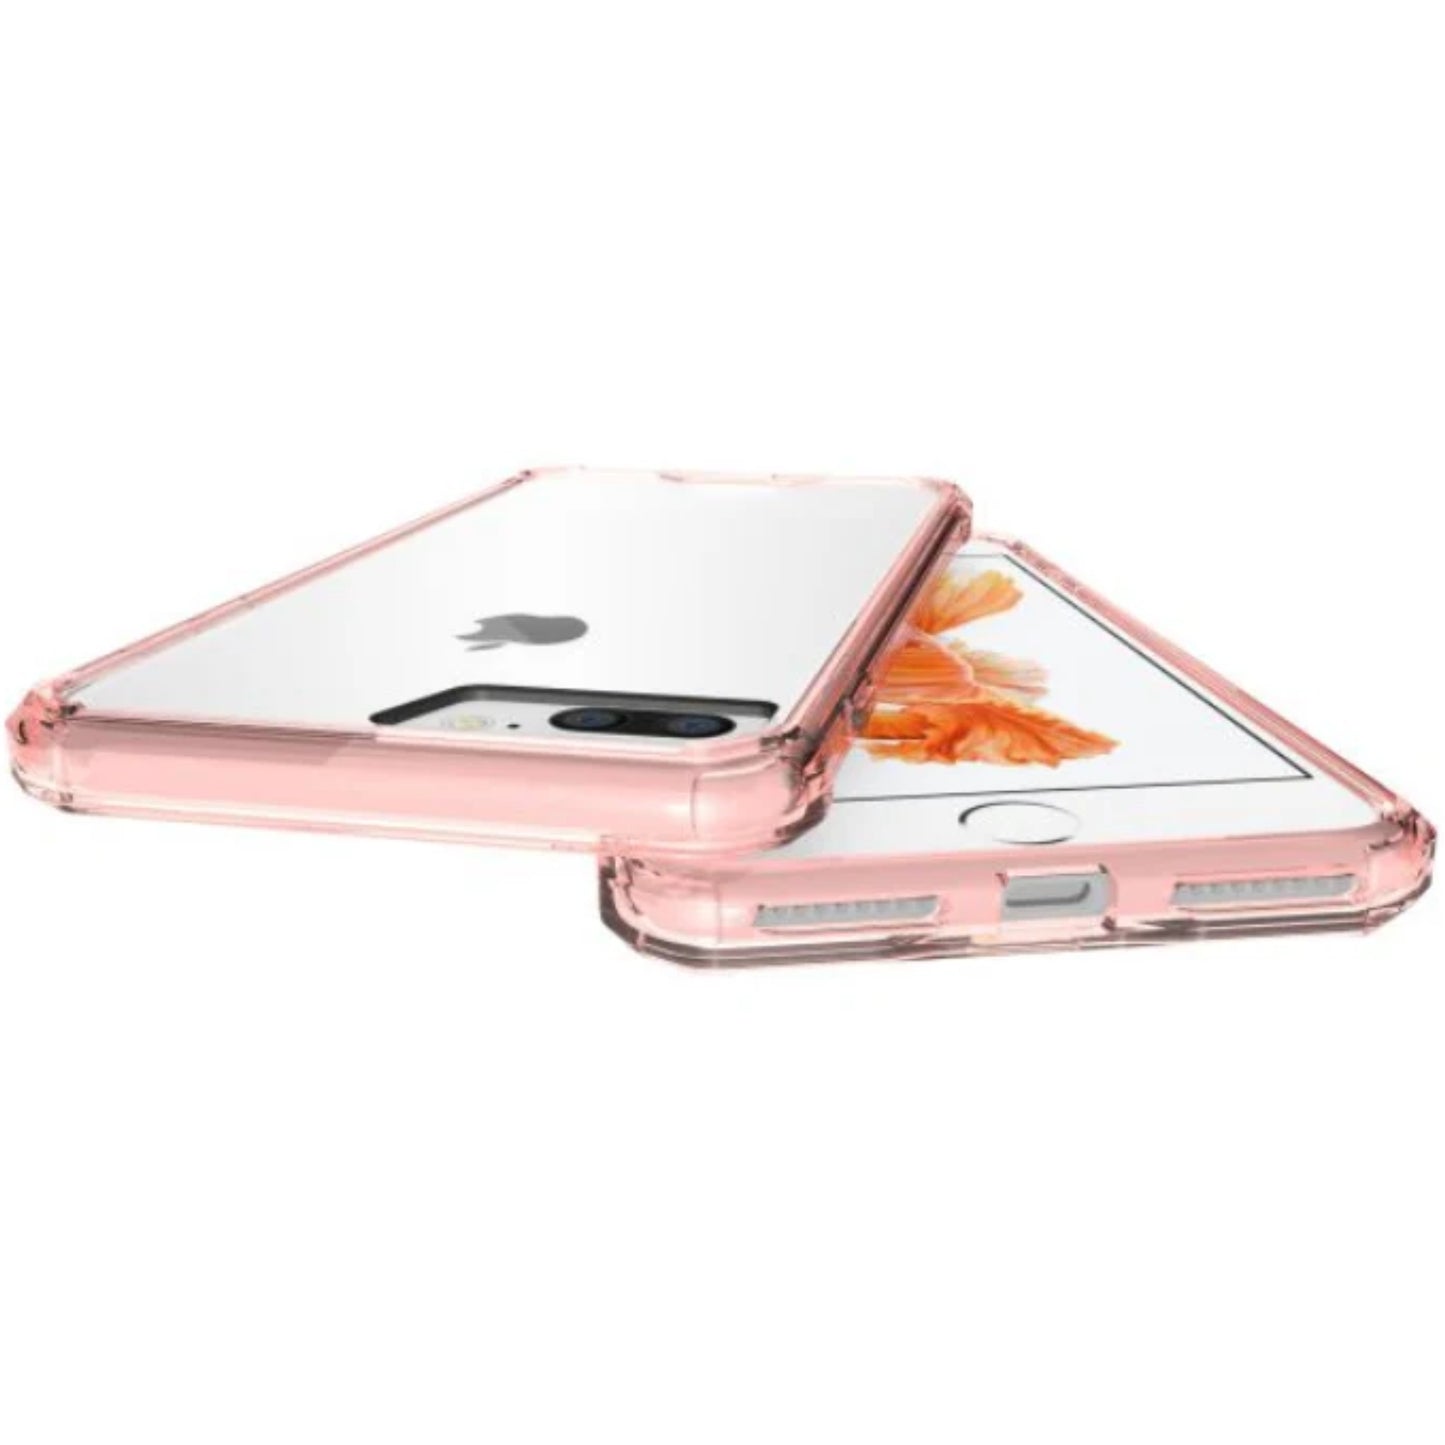 Mycase Air Armour Iphone Se2020 And 7/8 - Pink